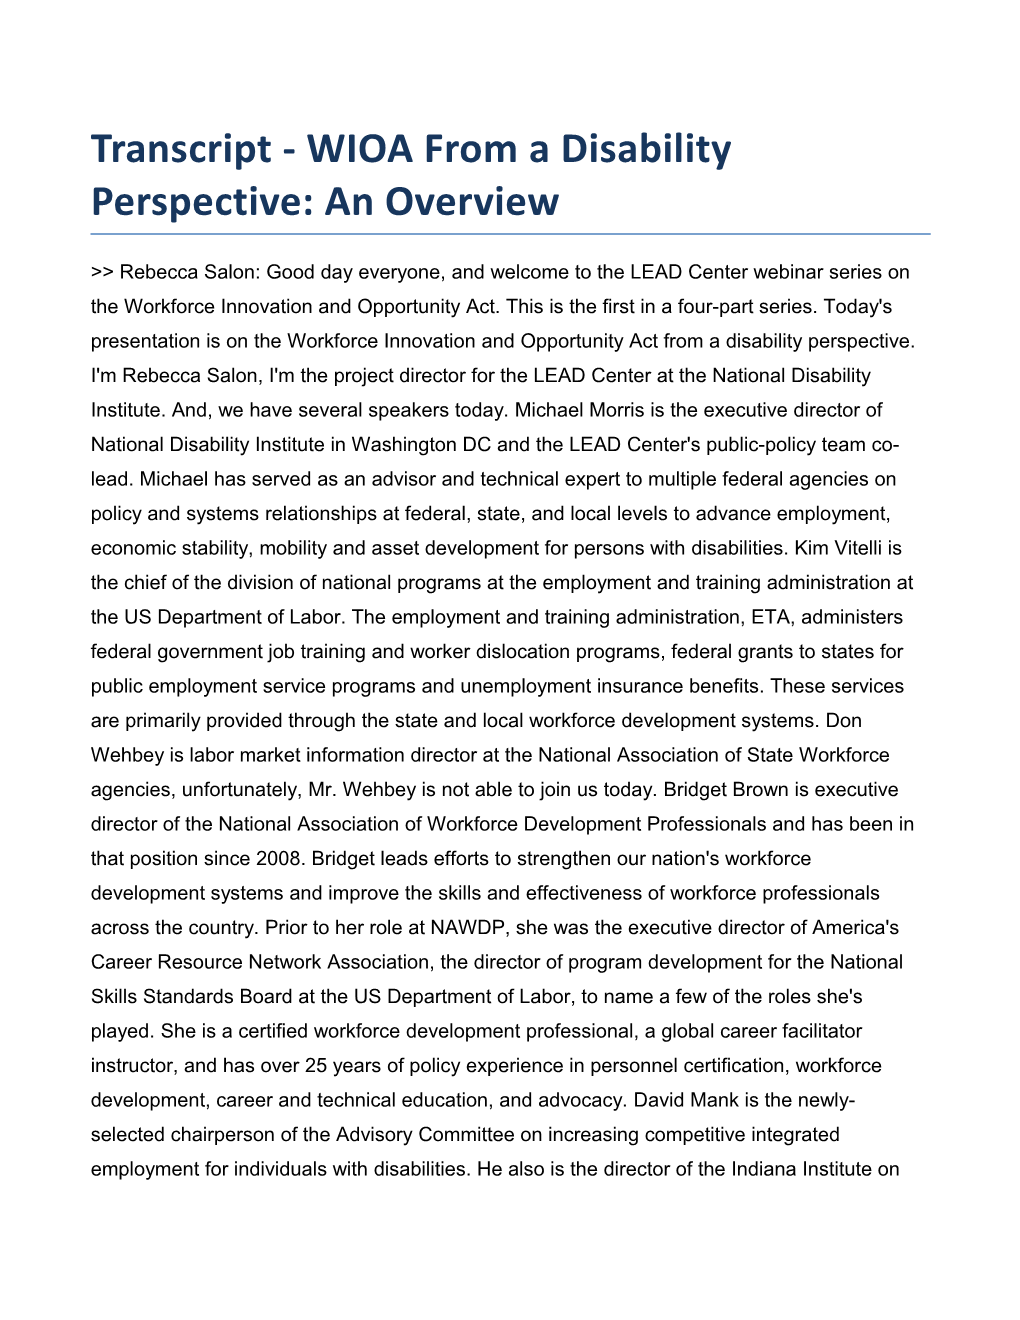 Transcript - WIOA from a Disability Perspective: an Overview